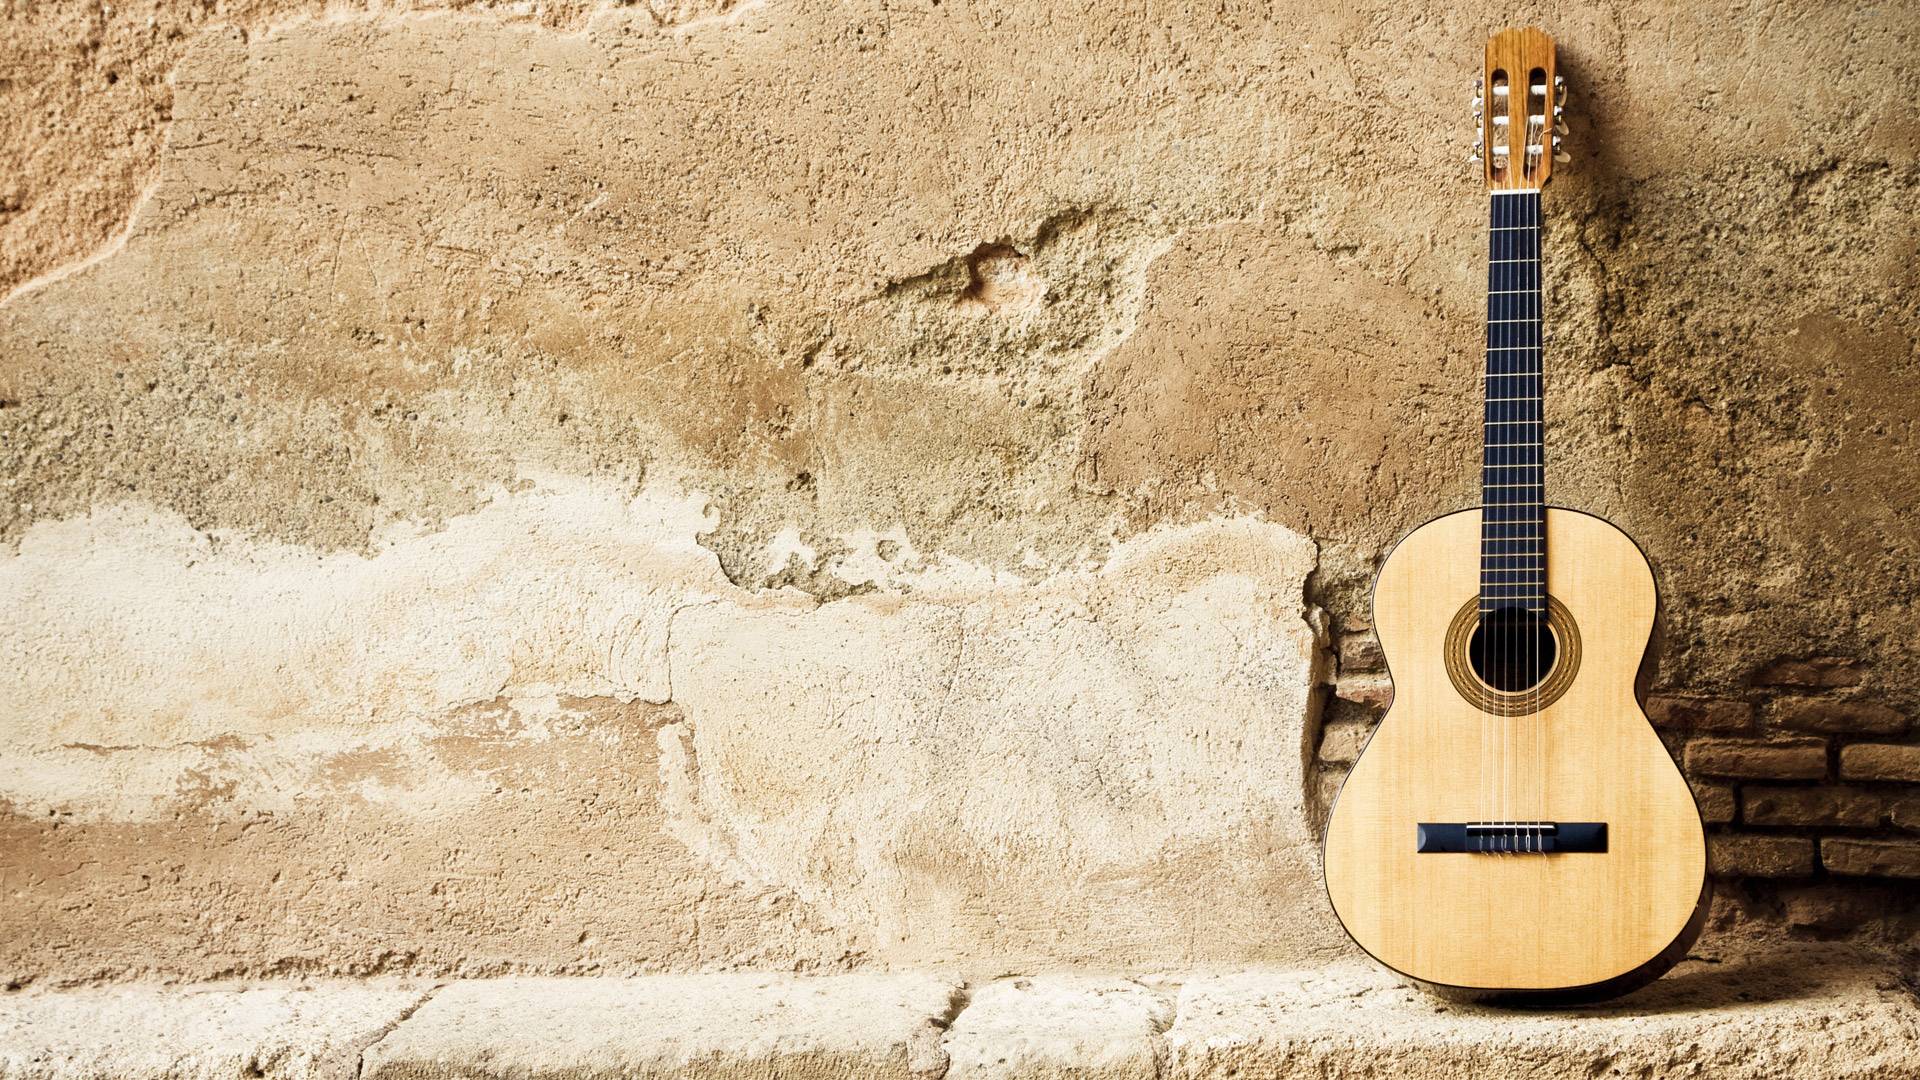 An acoustic guitar leaning against a wall - Guitar